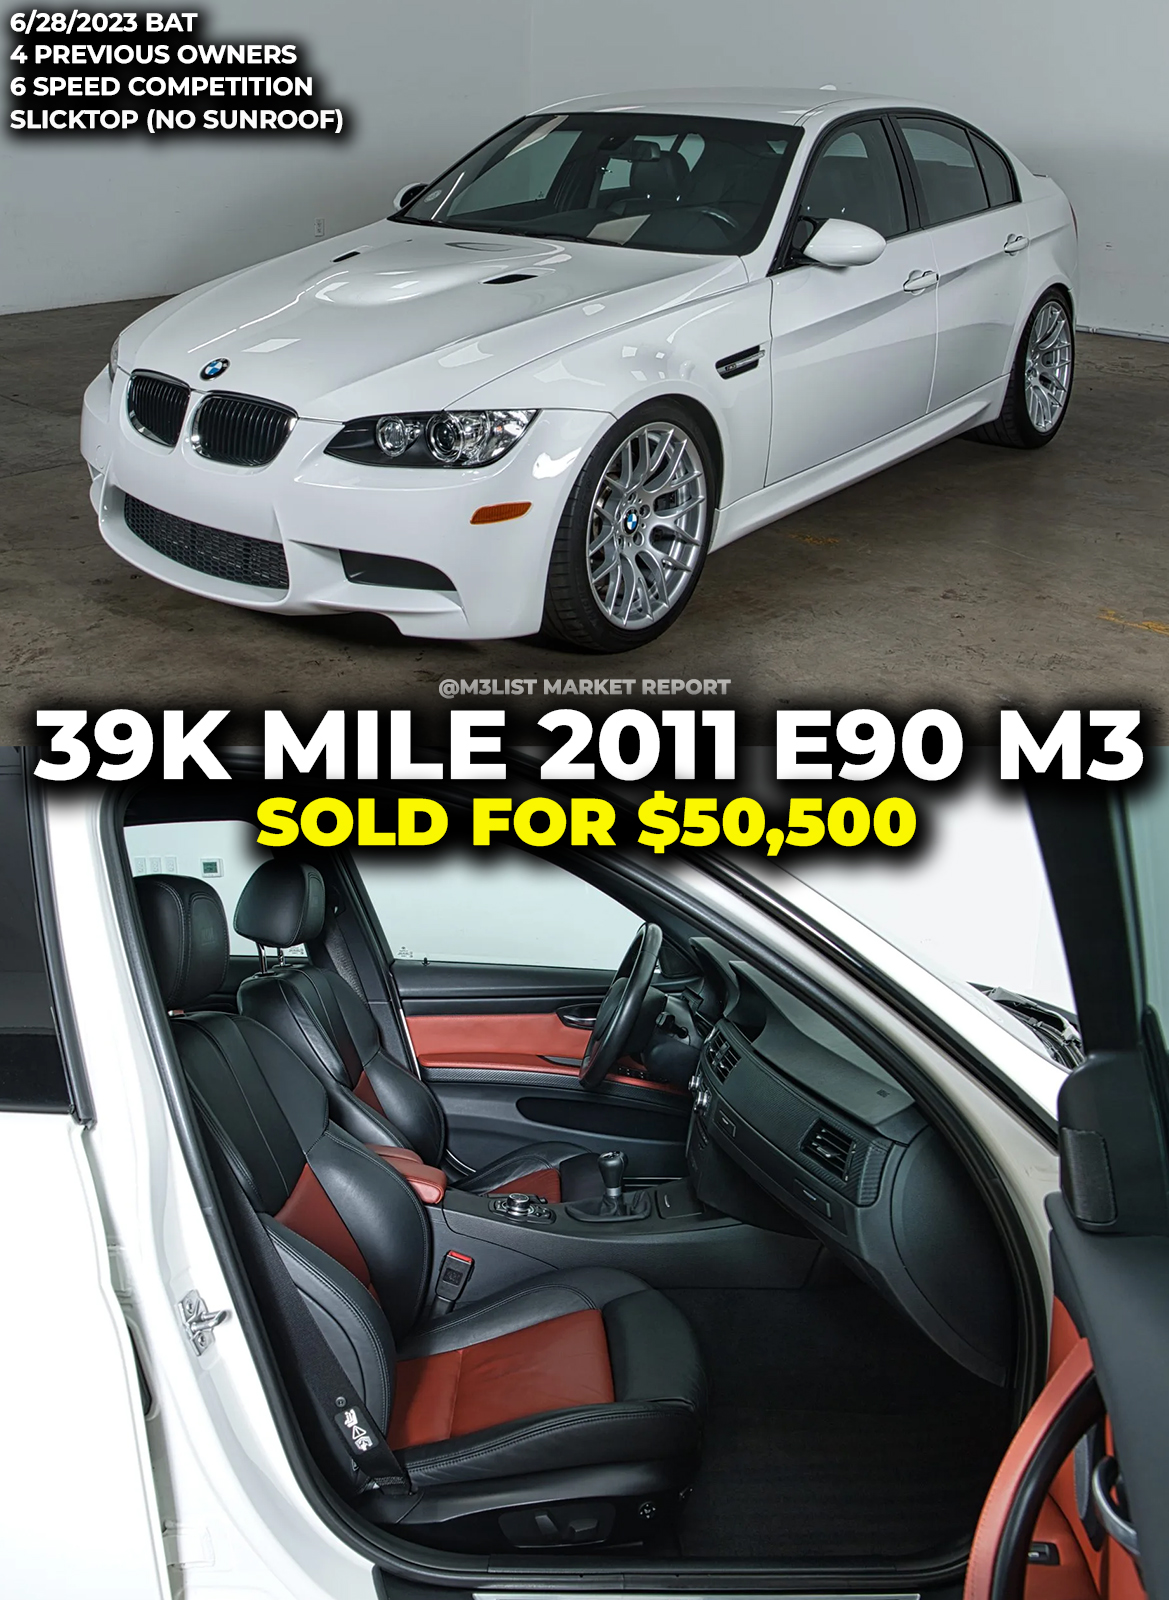 2011 BMW E90 M3 with 39k miles sells for $50,500 on Bring A Trailer. Good deal or bad deal? Slicktop!